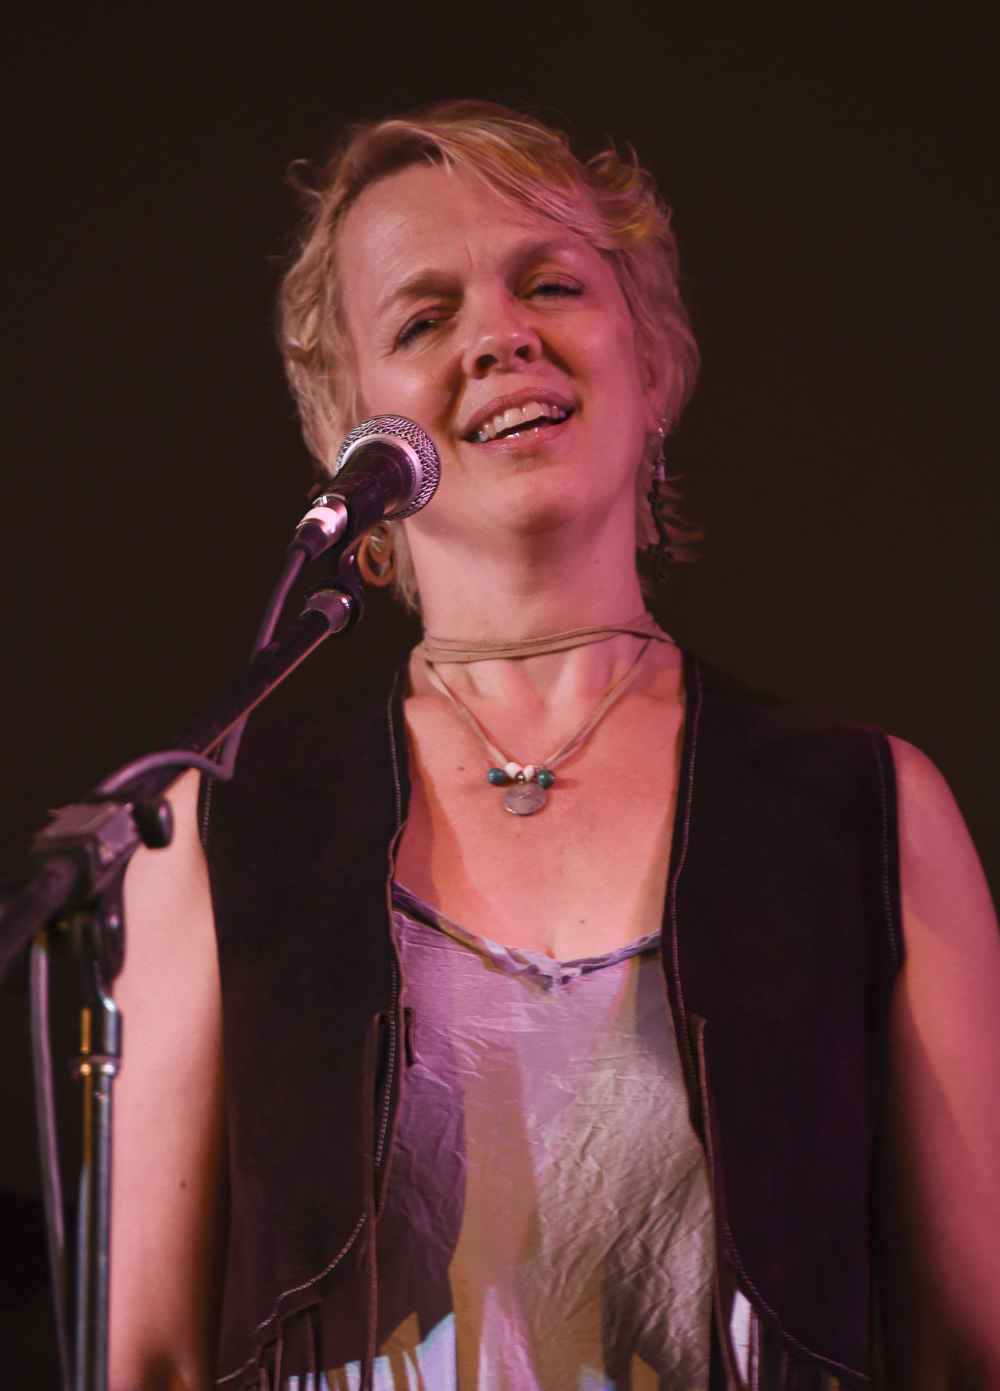  Barbara Meyer / Sacred Heart Music Center / Duluth, Minnesota / May 23rd, 2015 / Photo by Michael K. Anderson 